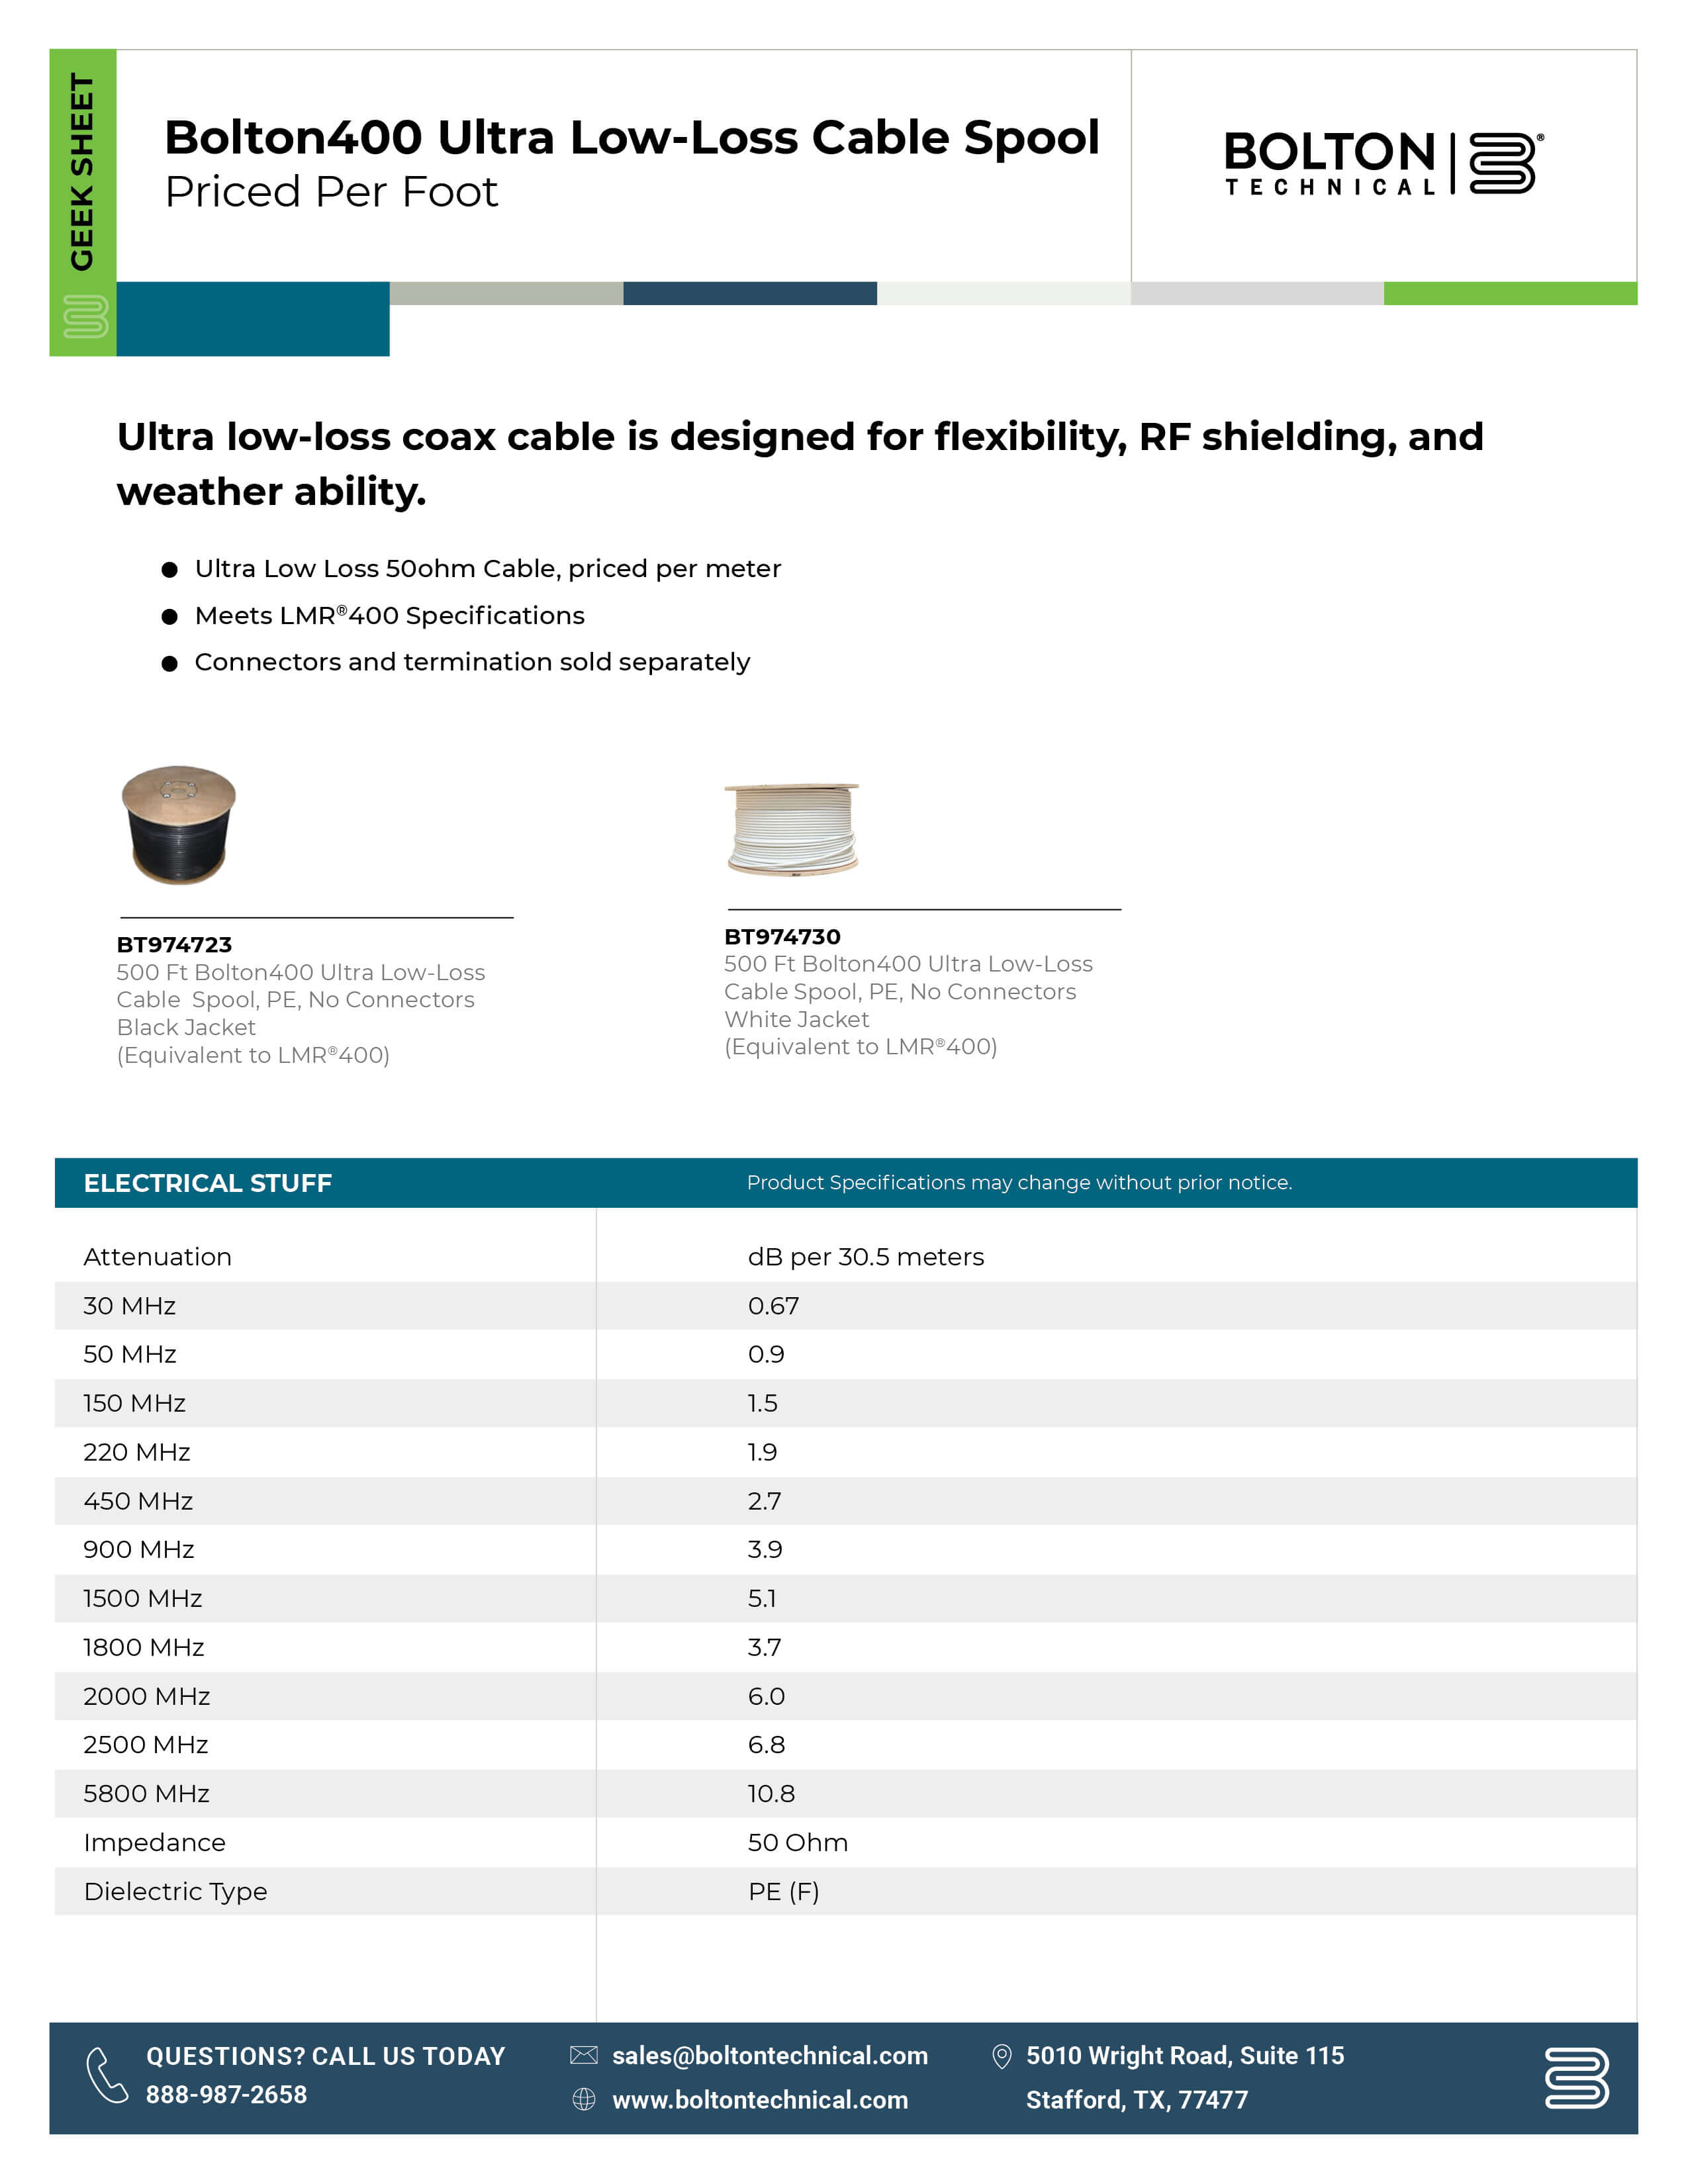 bolton 400 coaxial cable specifications sheet